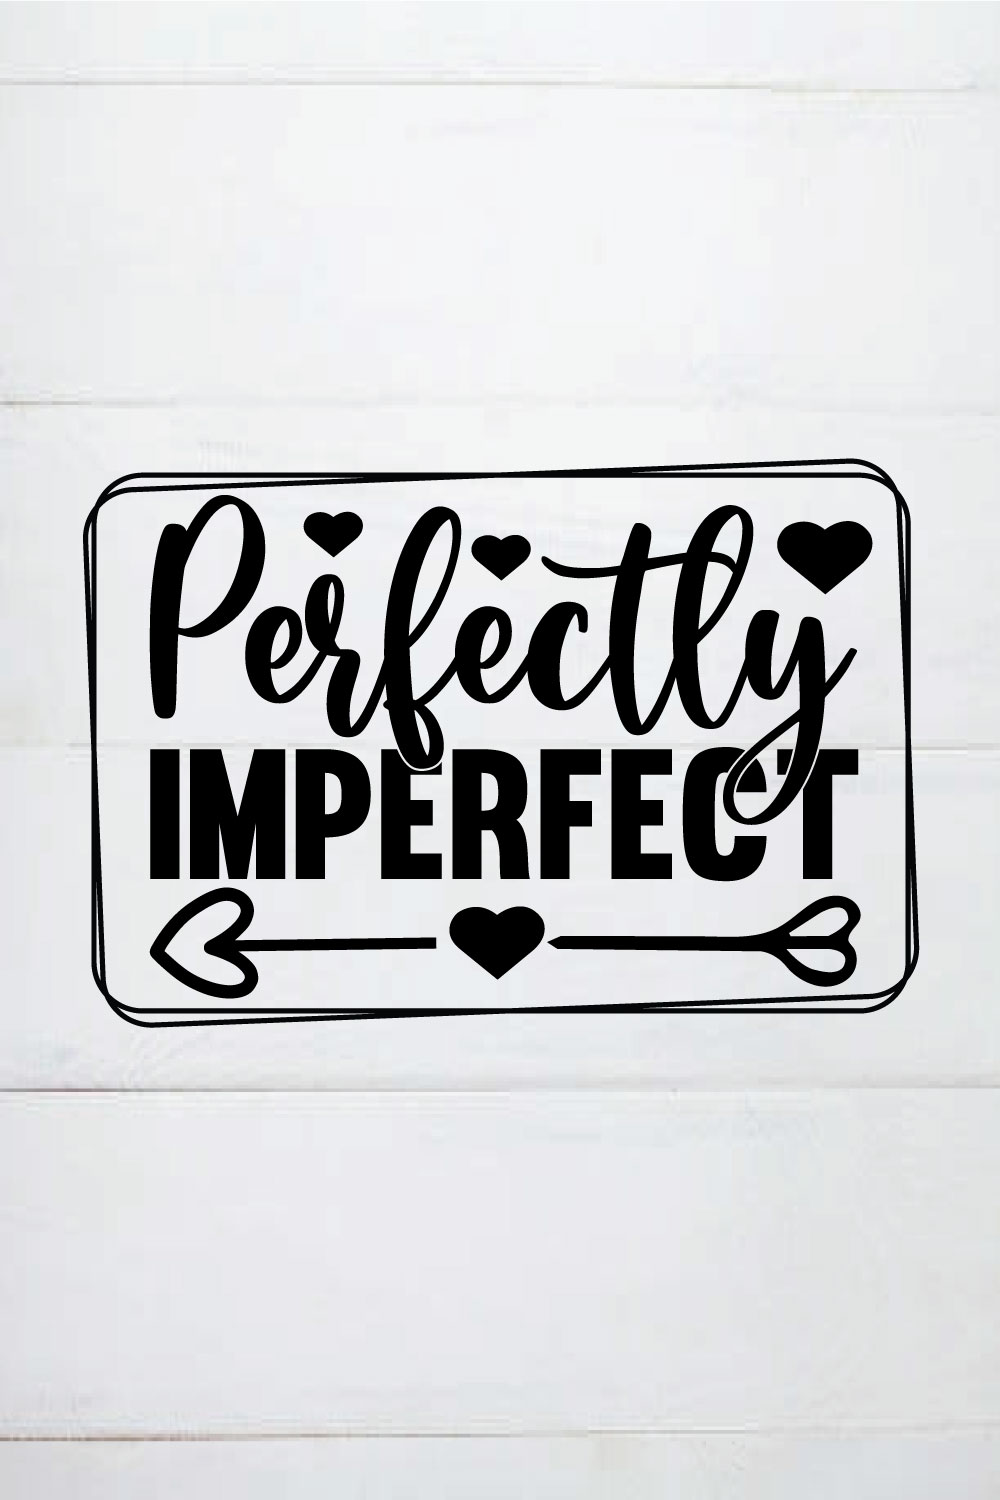 Perfectly imperfect shirt, Christian svg, Self Love, Easter svg, Worthy Svg, Momlife Svg, Inspirational Motivational Quotes Sayings Svg Cut File pinterest preview image.